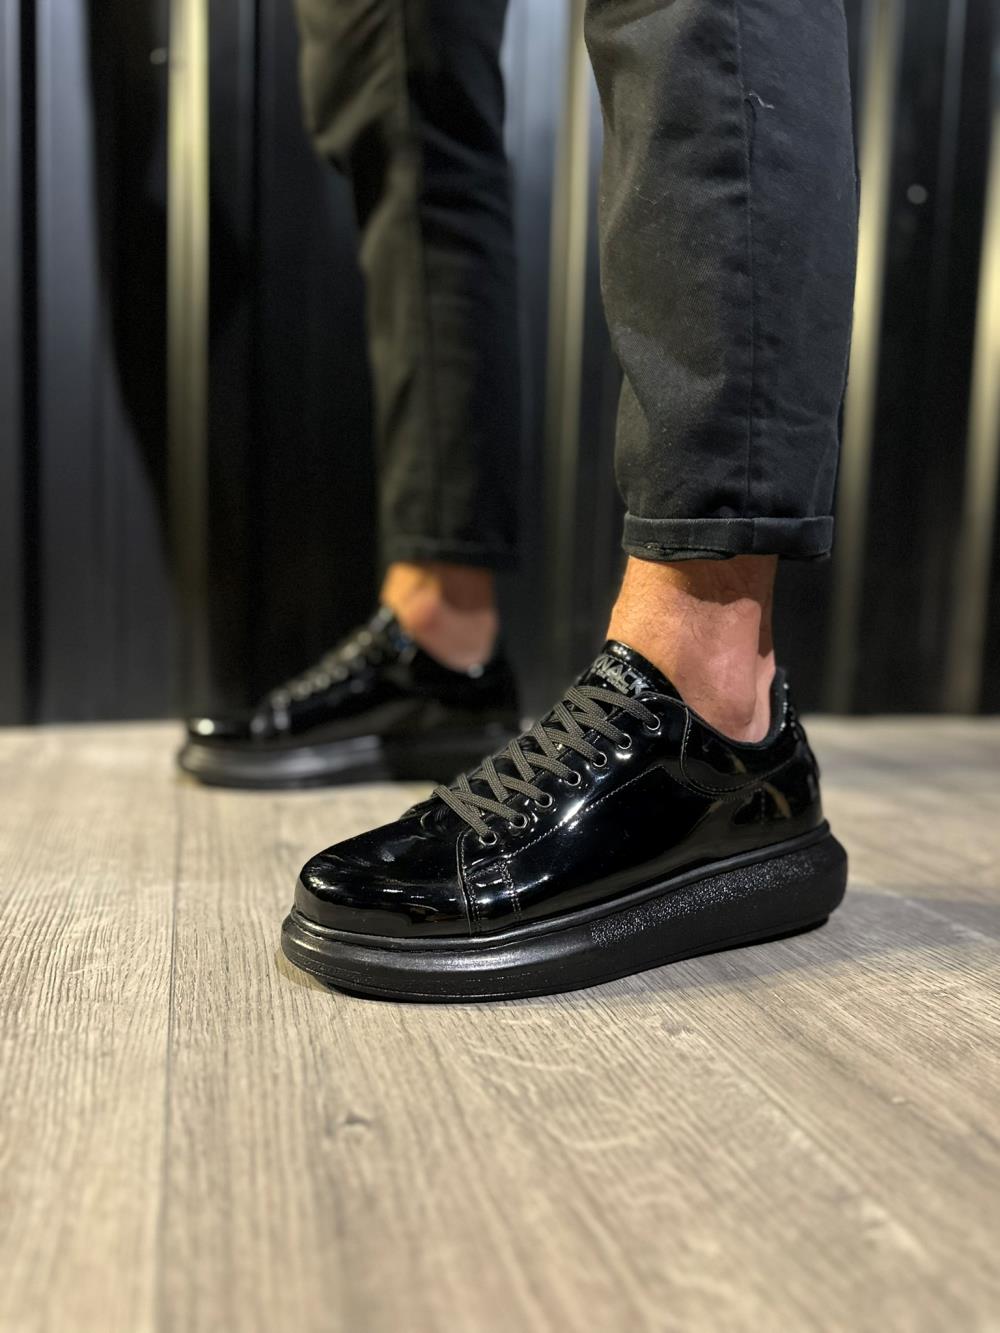 Men's High Sole Casual Shoes 044 Black Patent Leather (Black Sole) - STREETMODE™